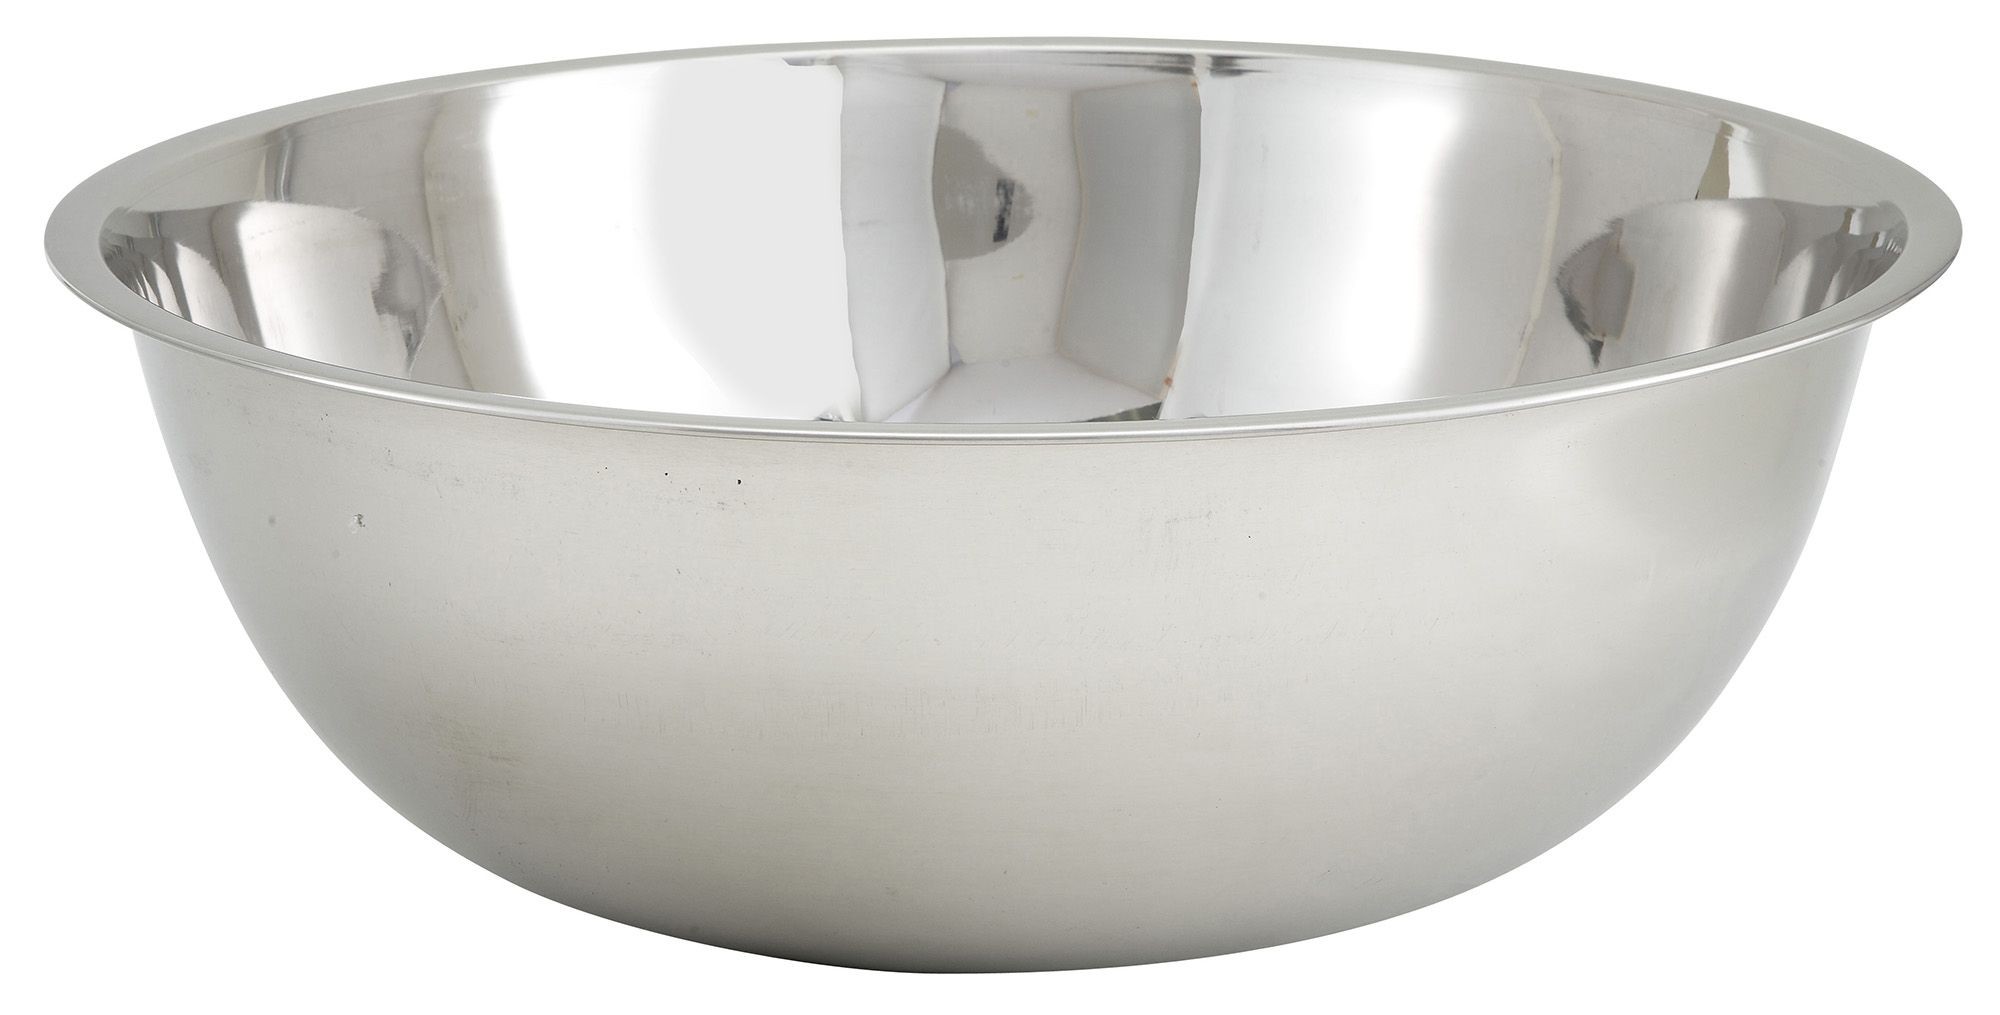 stainless steel mixing bowls made in america